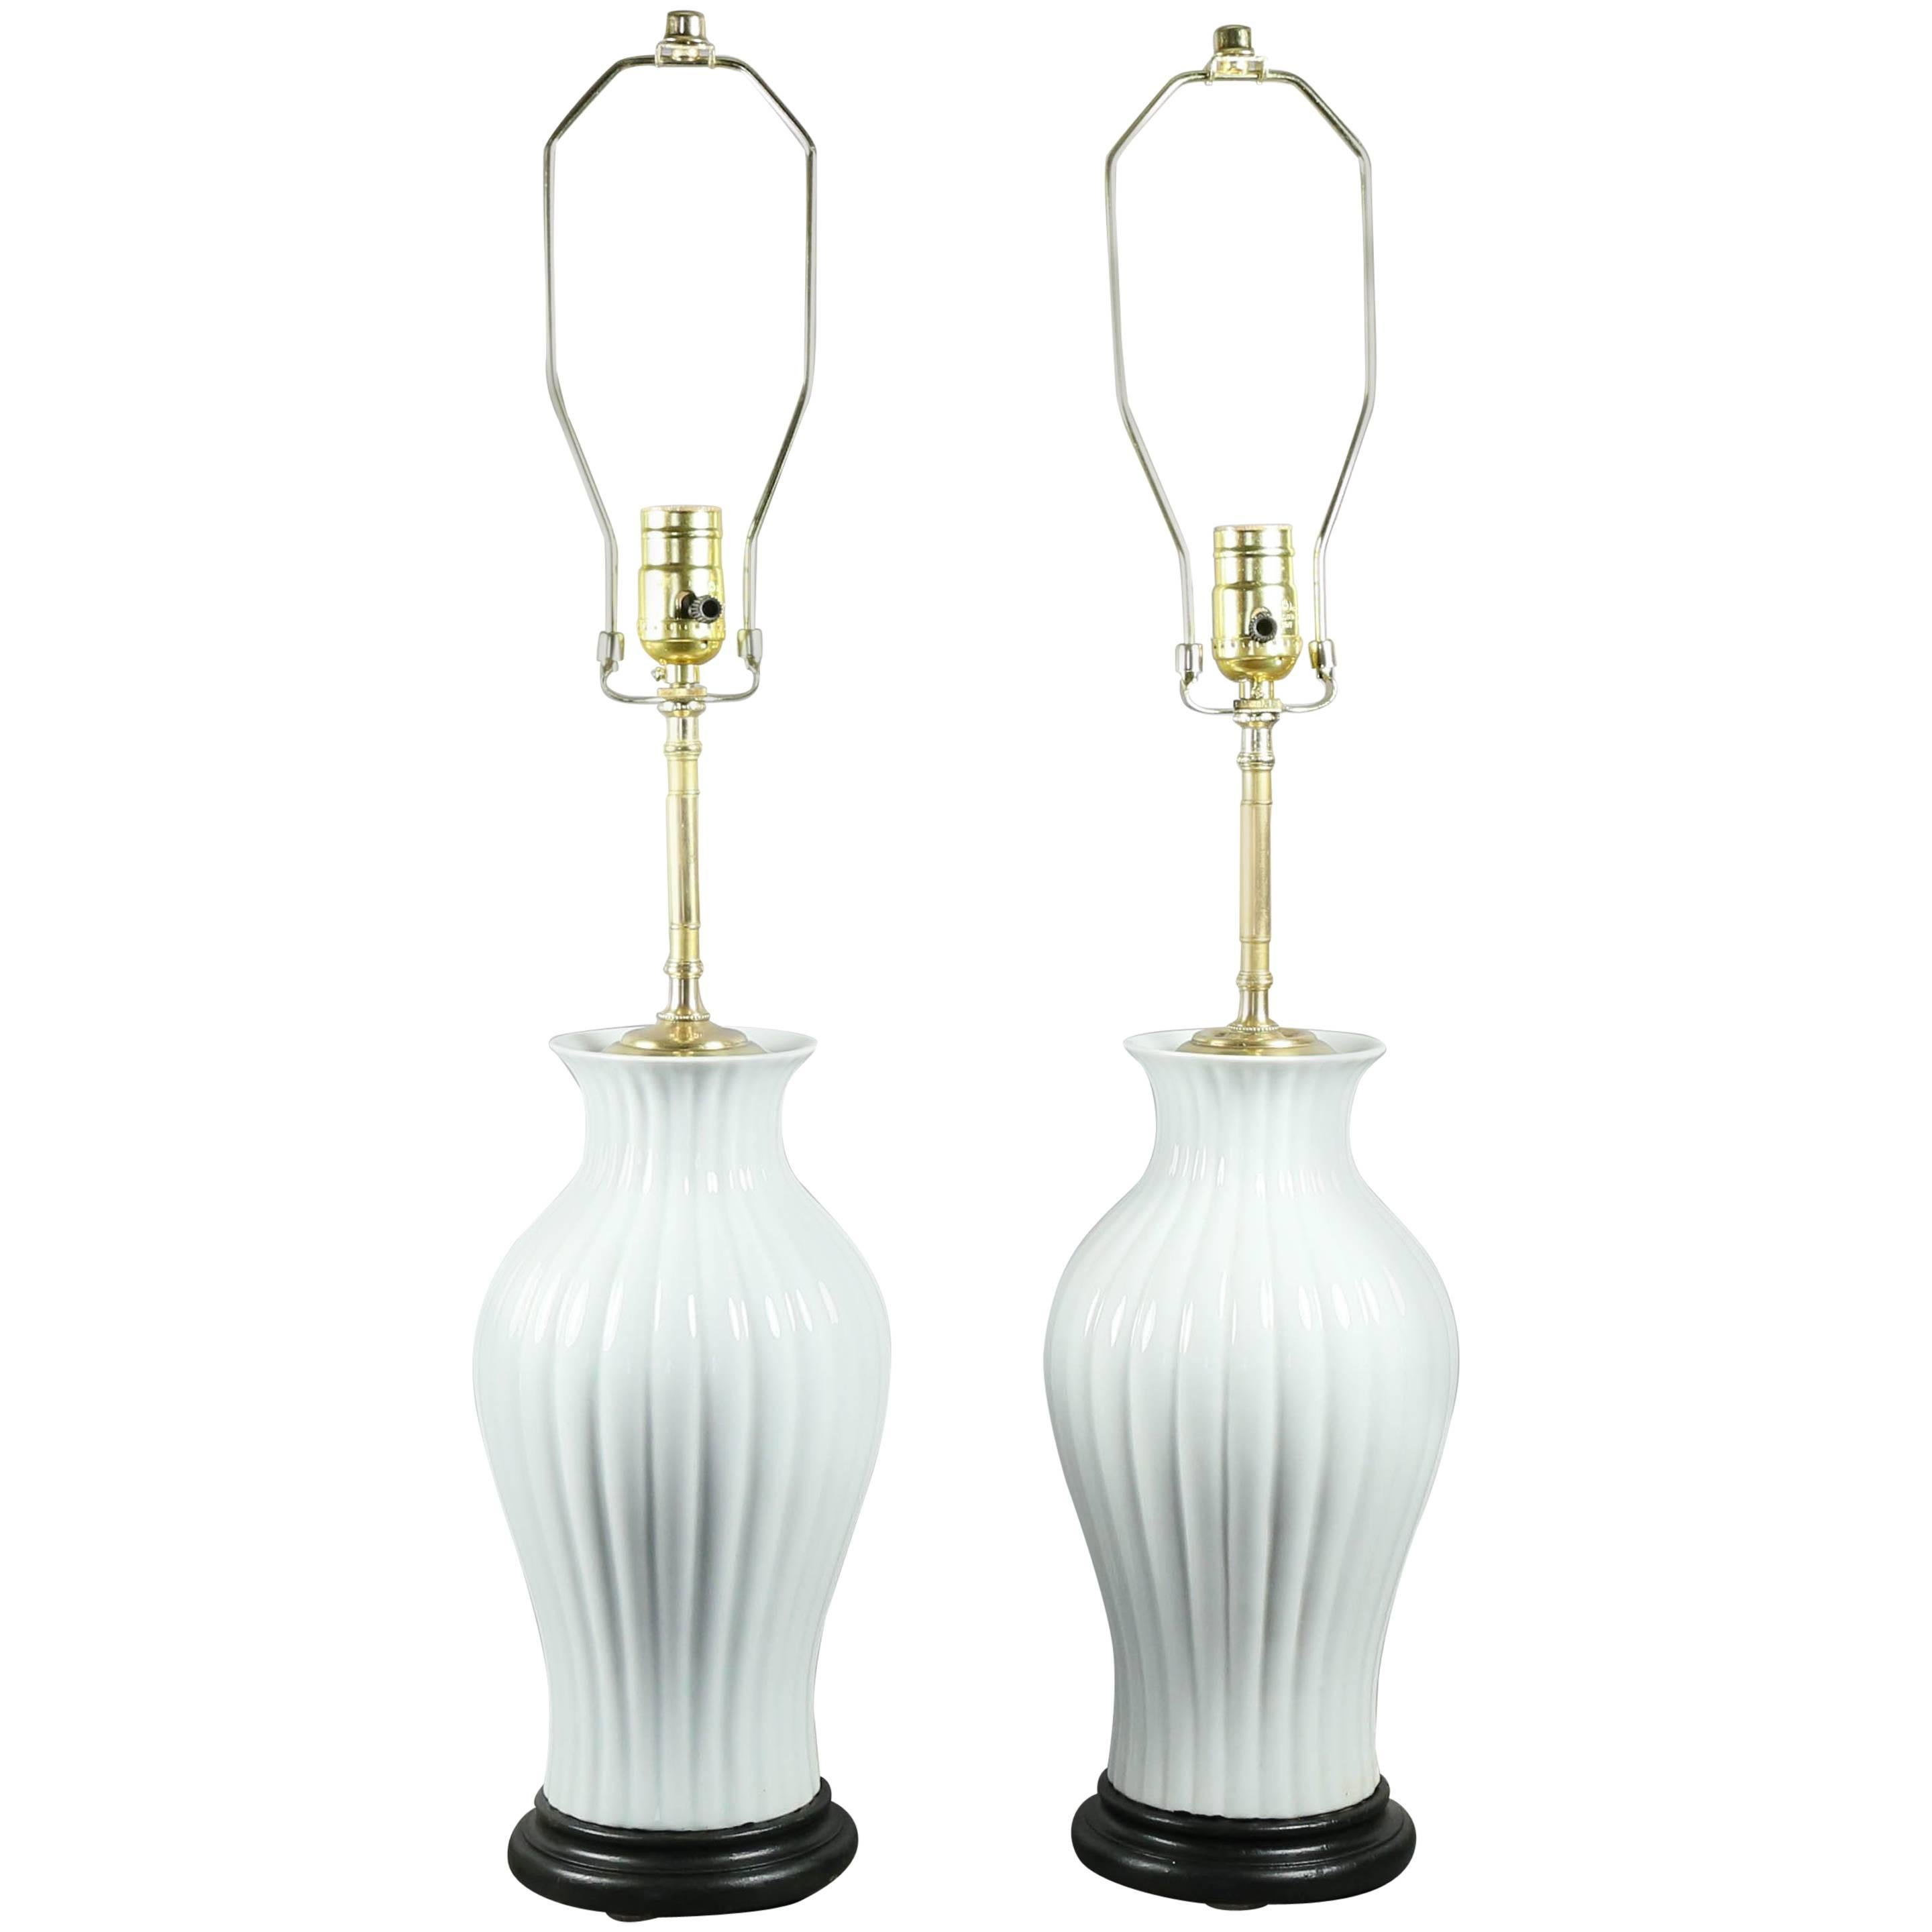 Pair of Japanese White Porcelain Table Lamps